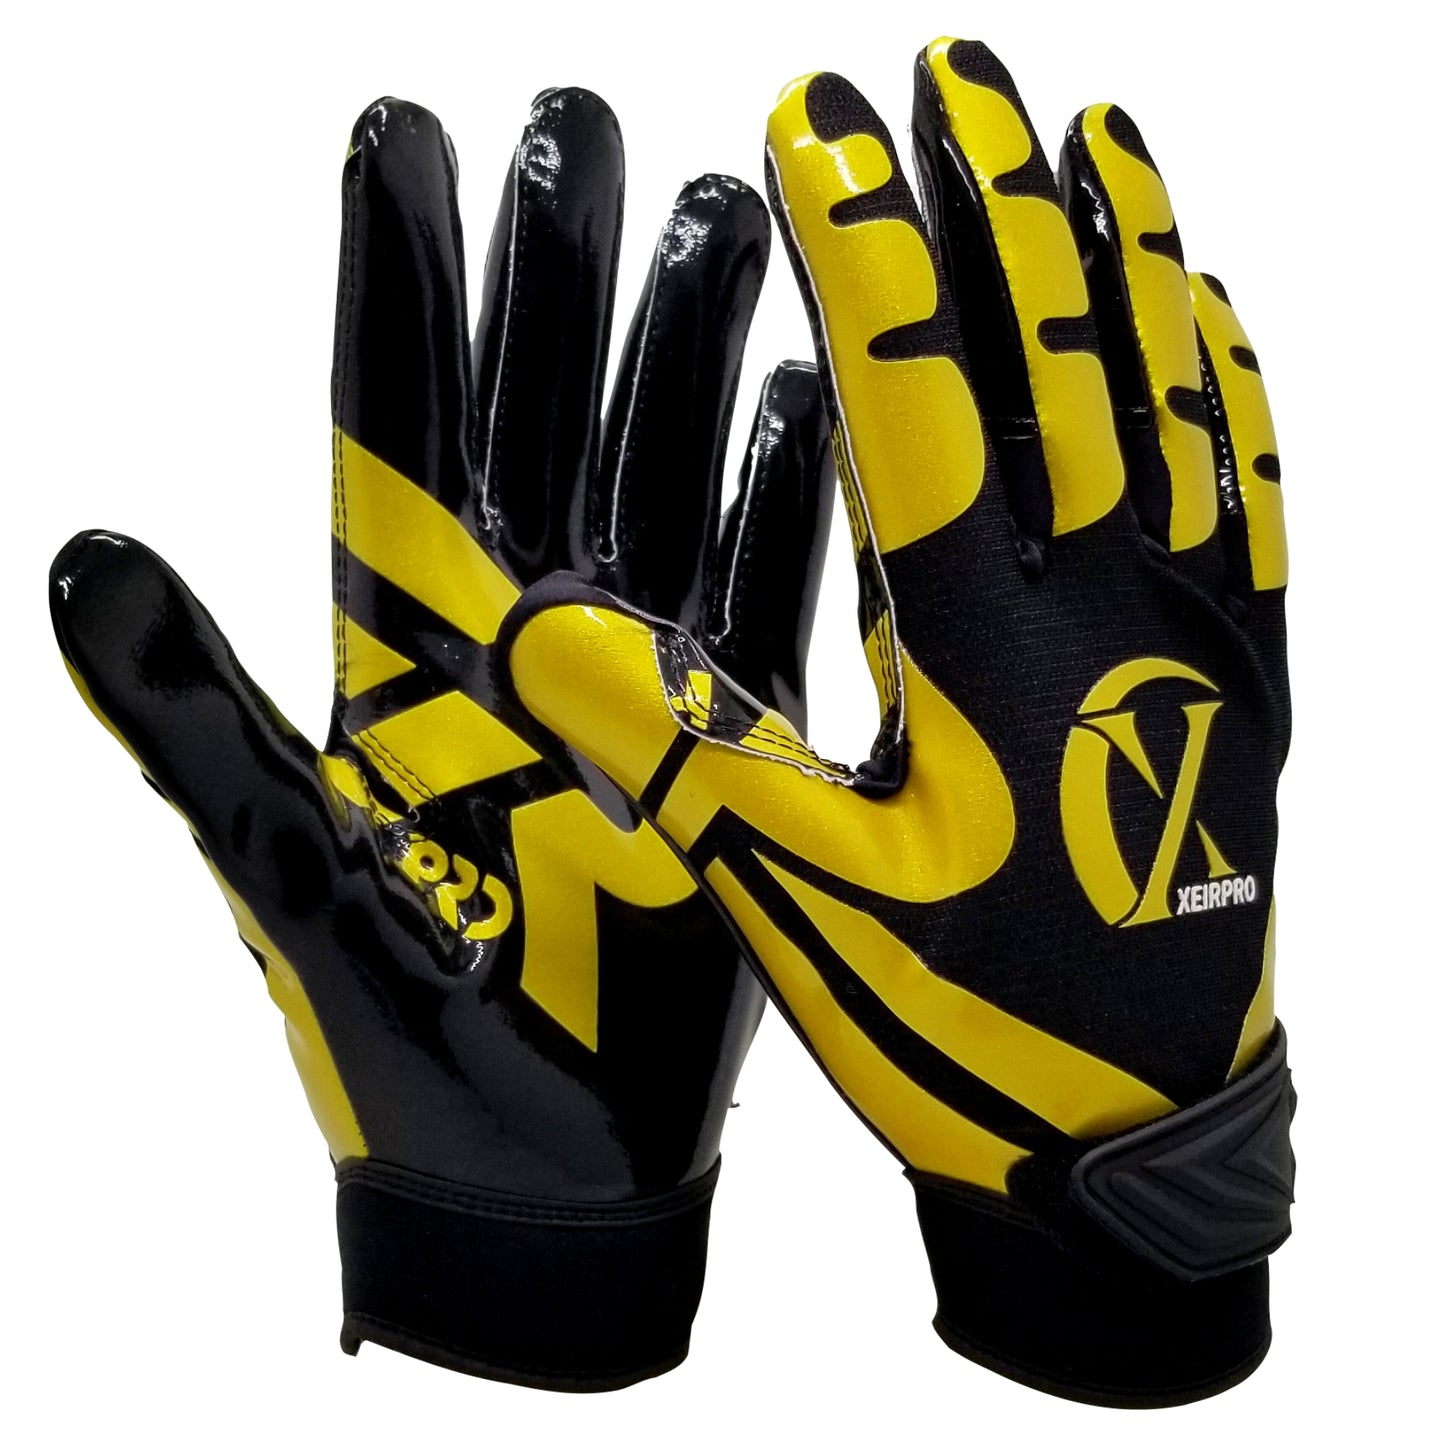 XEIR PRO Football Receiver Gloves (Adult Size) - Black